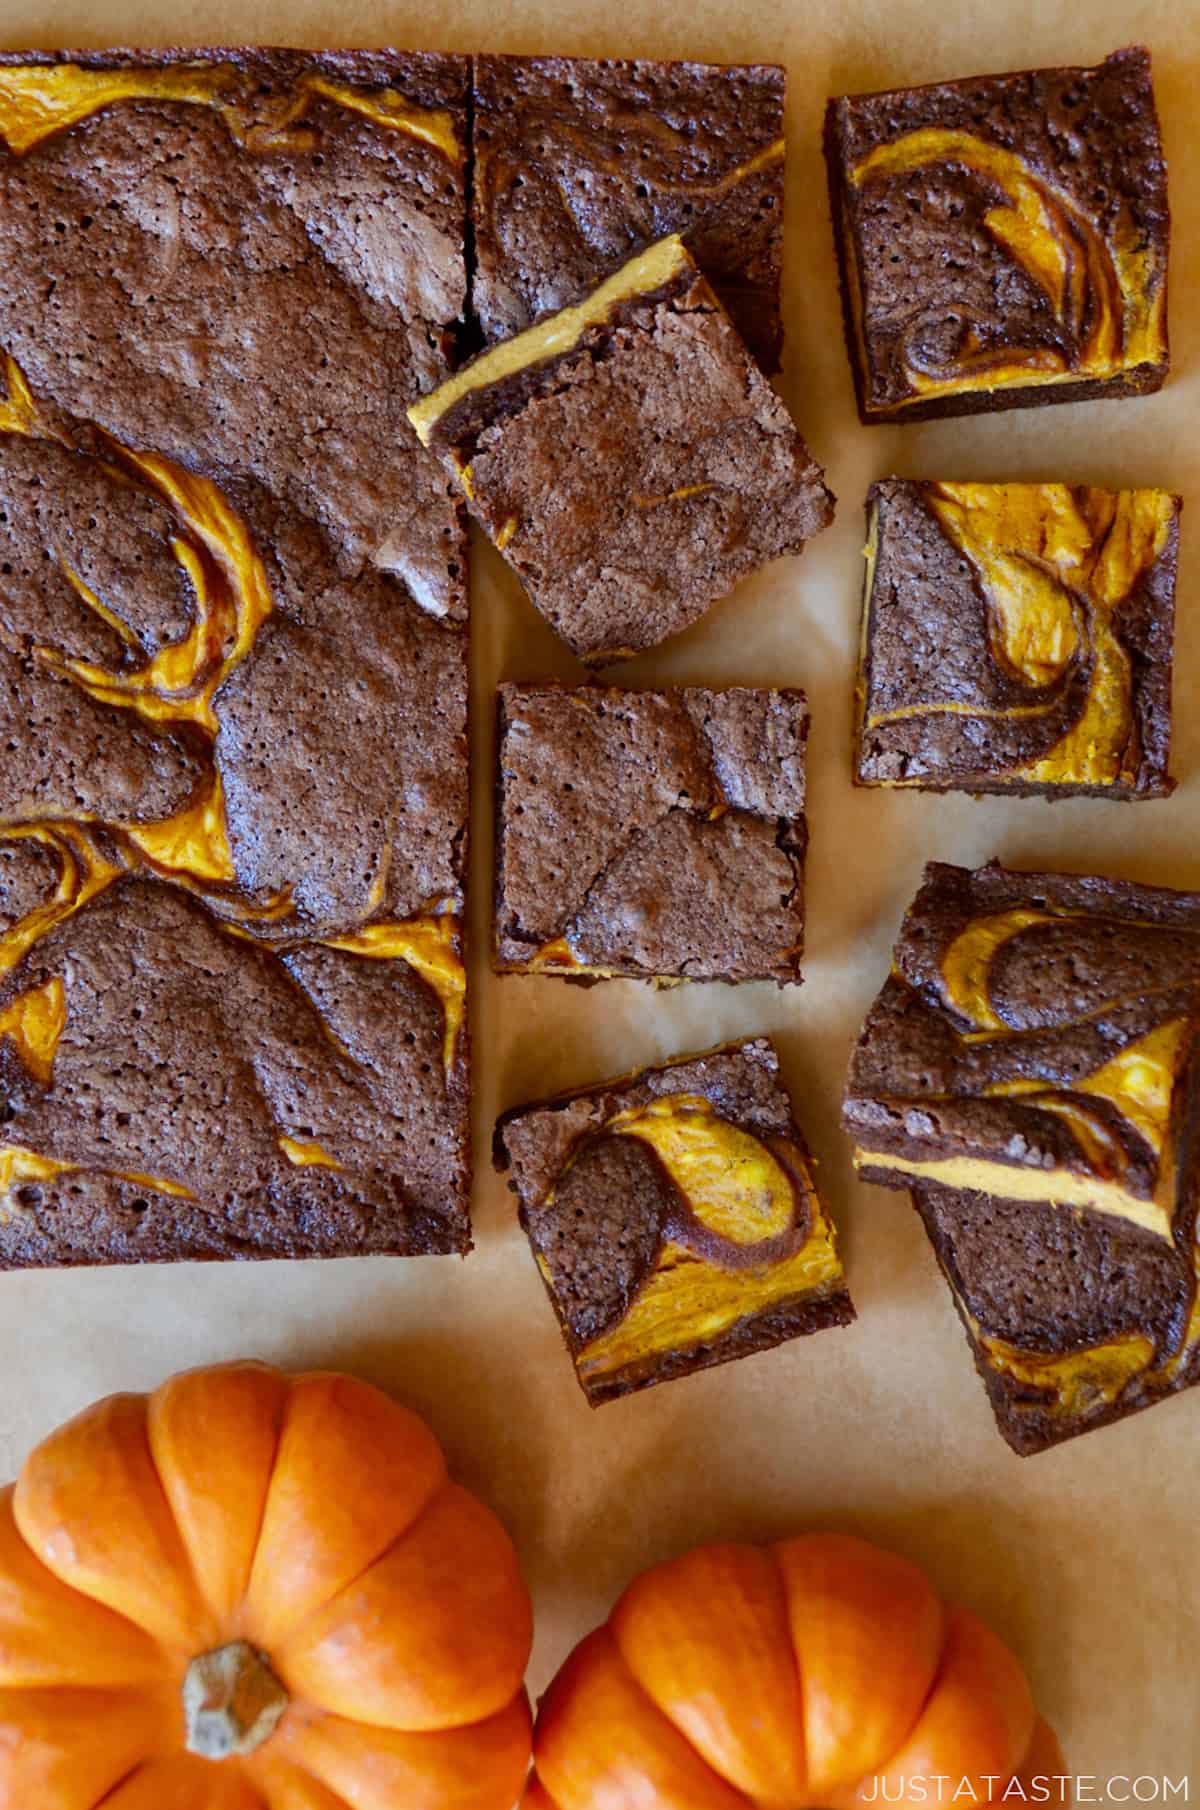 Pumpkin cheesecake brownies out of their pan and with several squares of brownies cut off and two small pumpkins beside them.